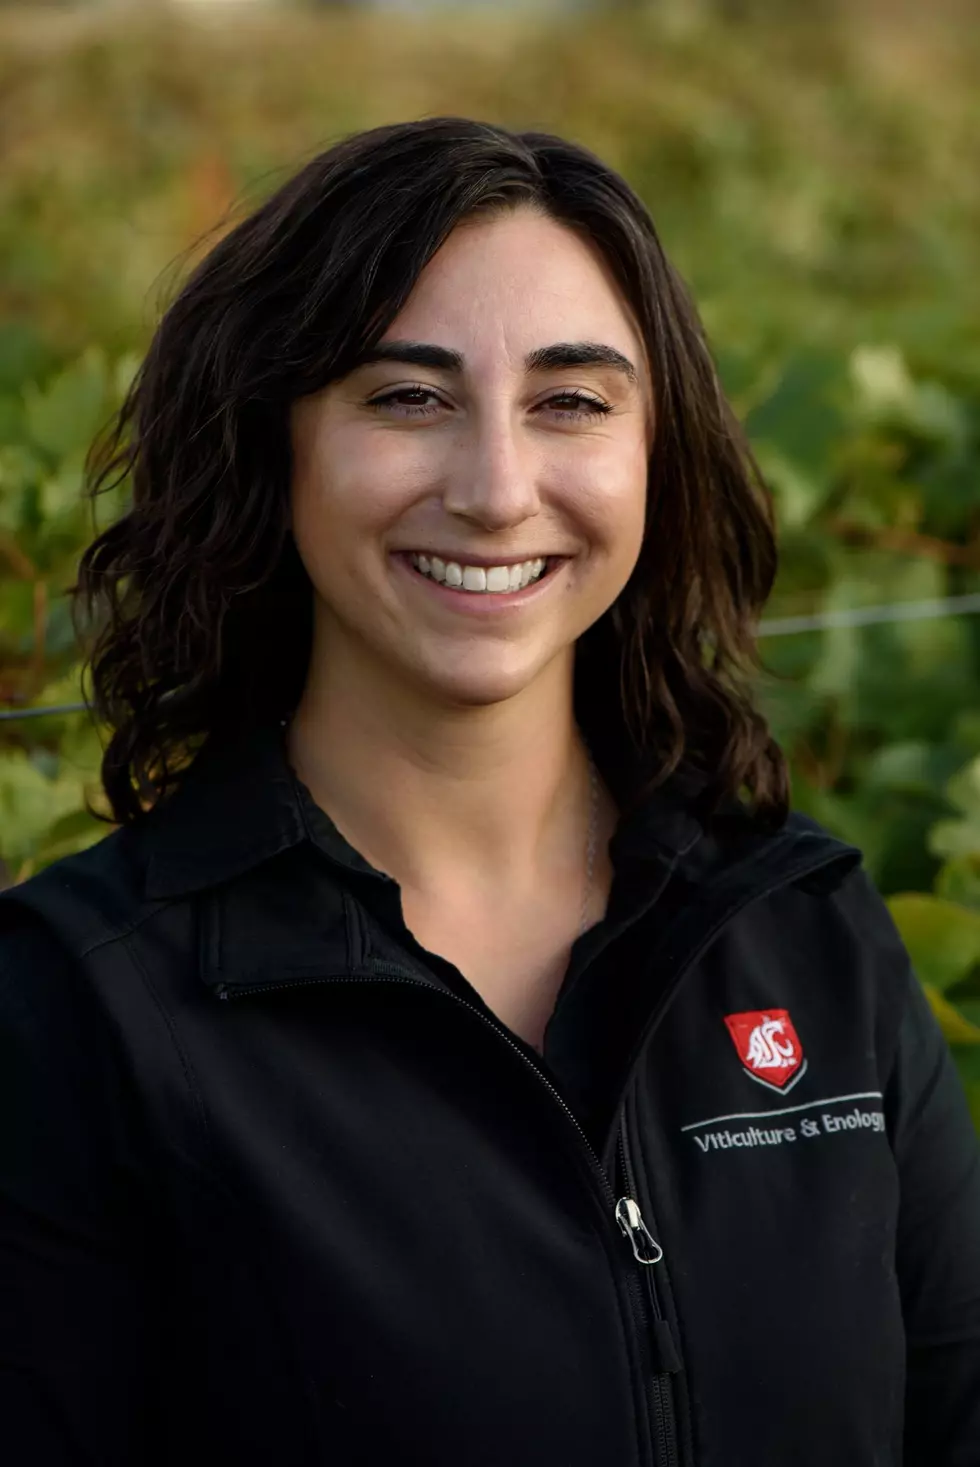 Wine Minute: McDaniel Explains What Draws Her To The Wine Industry